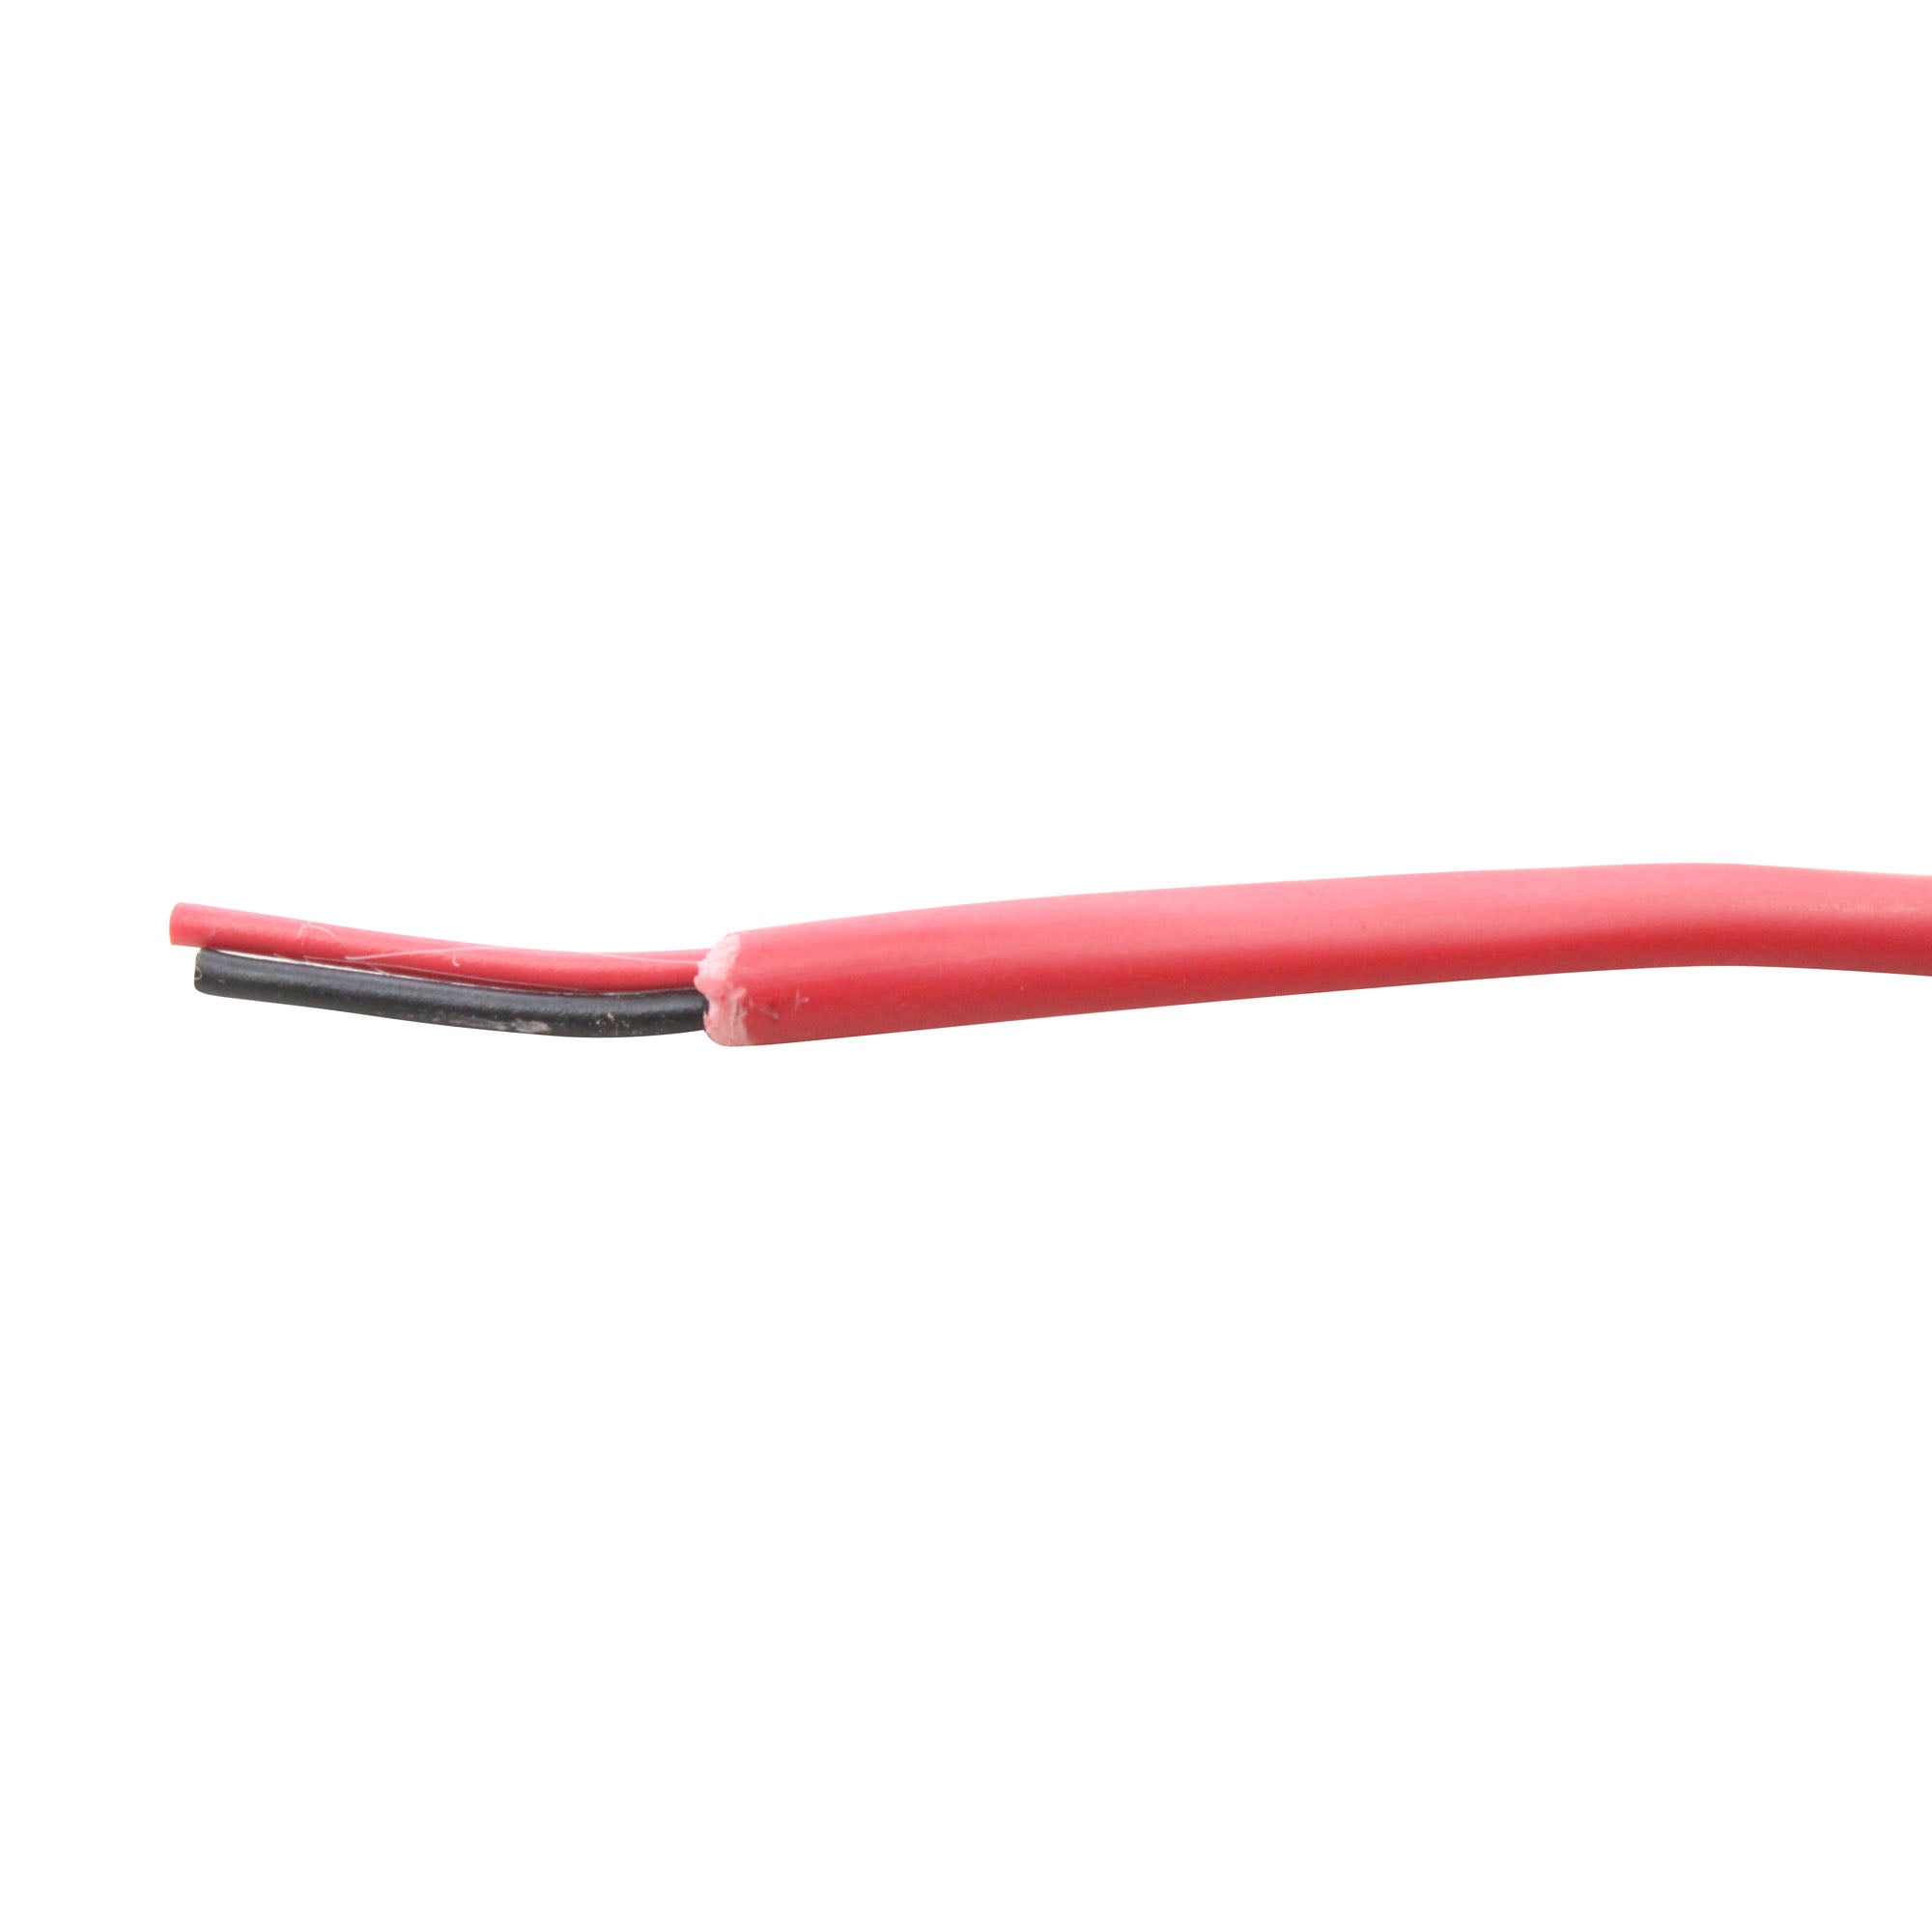 FASTER CABLE, FASTER CABLE P222C-RED 22AWG 2C, 22/2 STR CMP PLENUM CONTROL CABLE, GRAY, 1000'